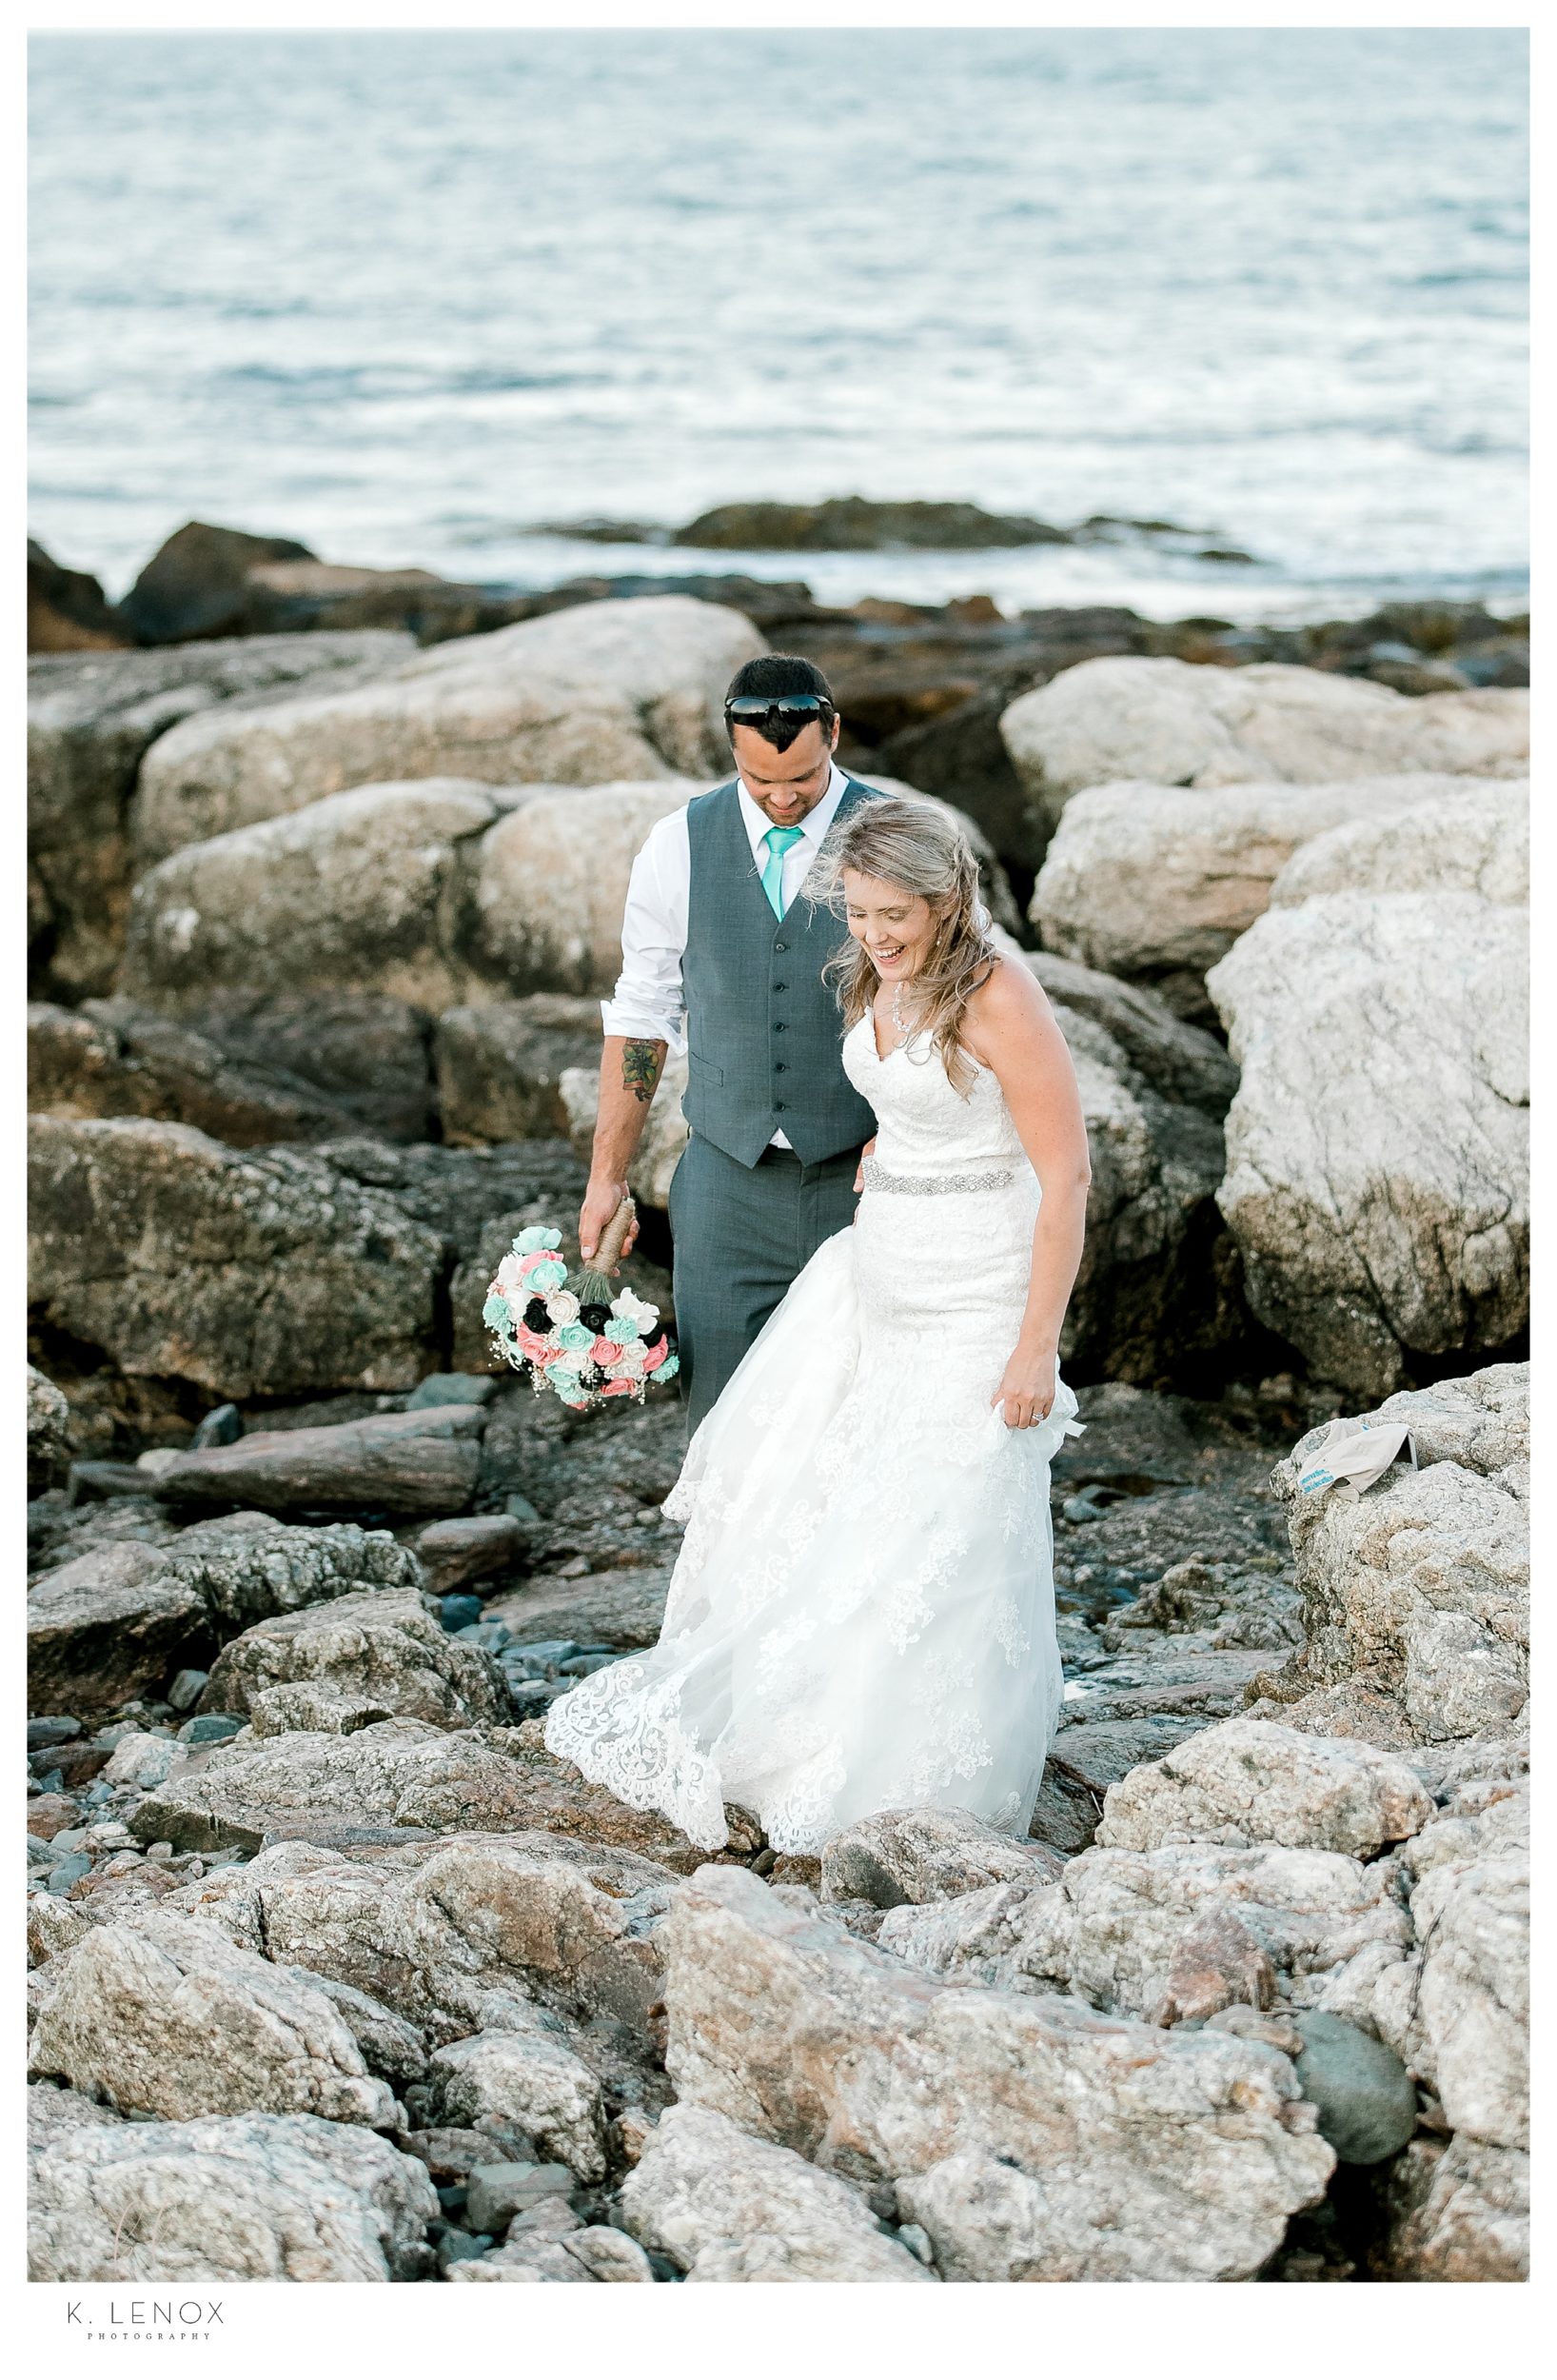 Bride and groom walk on the rocks near the ocean at the Seacoast Science center after their wedding